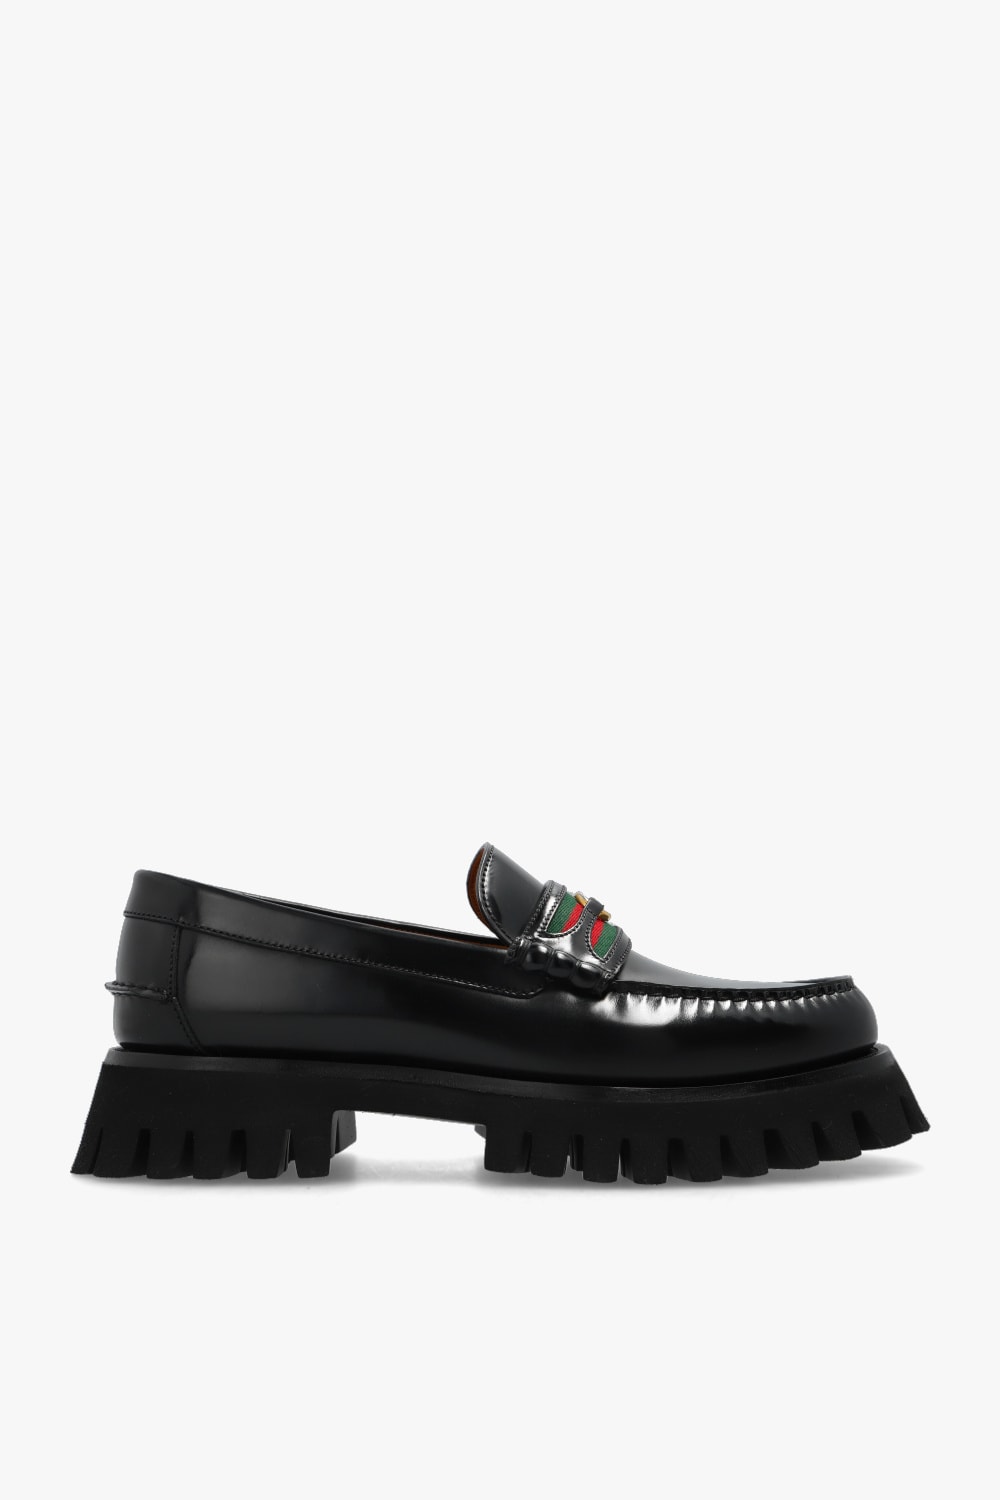 Gucci Loafers With Interlocking G